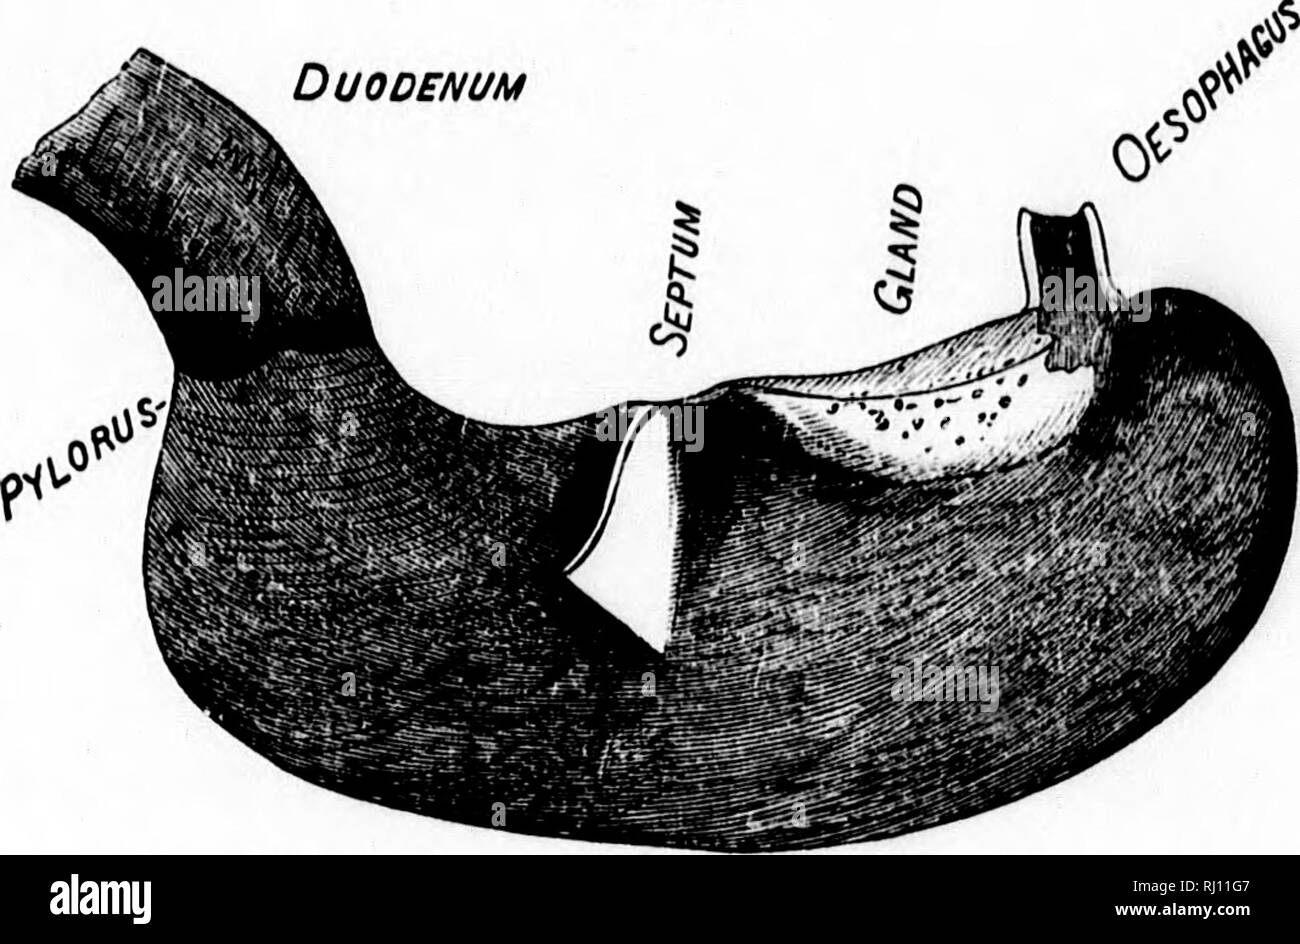 . The American beaver and his works [microform]. Beavers; Castors. would lead to the conclusion that both longitudinal and lateral motions were concerned in the grinding operations. Fia. 6.. stomach of beaver, inside view. Oue-qiiarter natural size. The insalivation of the dry food of the beaver is provided for by the extraordinary development of the salivary glands. The parotid and submaxillary glands, united, are very large, and cover the front and sides of the neck. The oesophageal membrane is white, thick, and loosely attached to the muscular coat. Where it enters the stomach it has a free Stock Photo